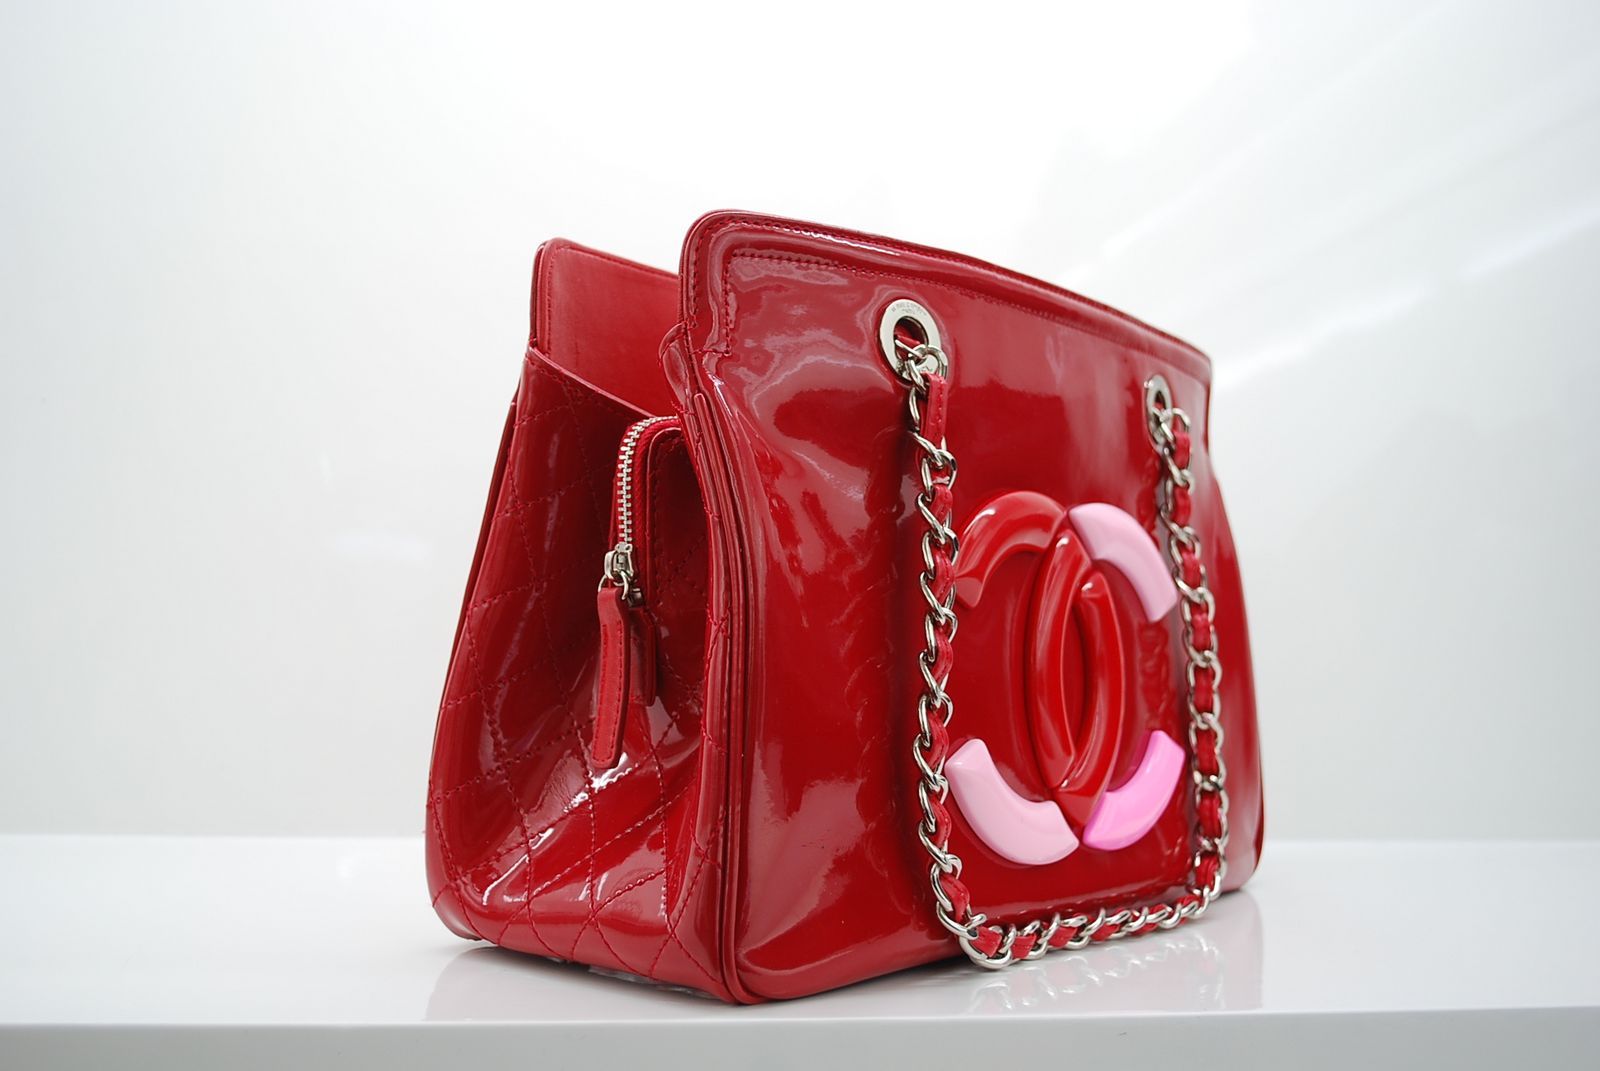 All best buy: Chanel handbag red chains red